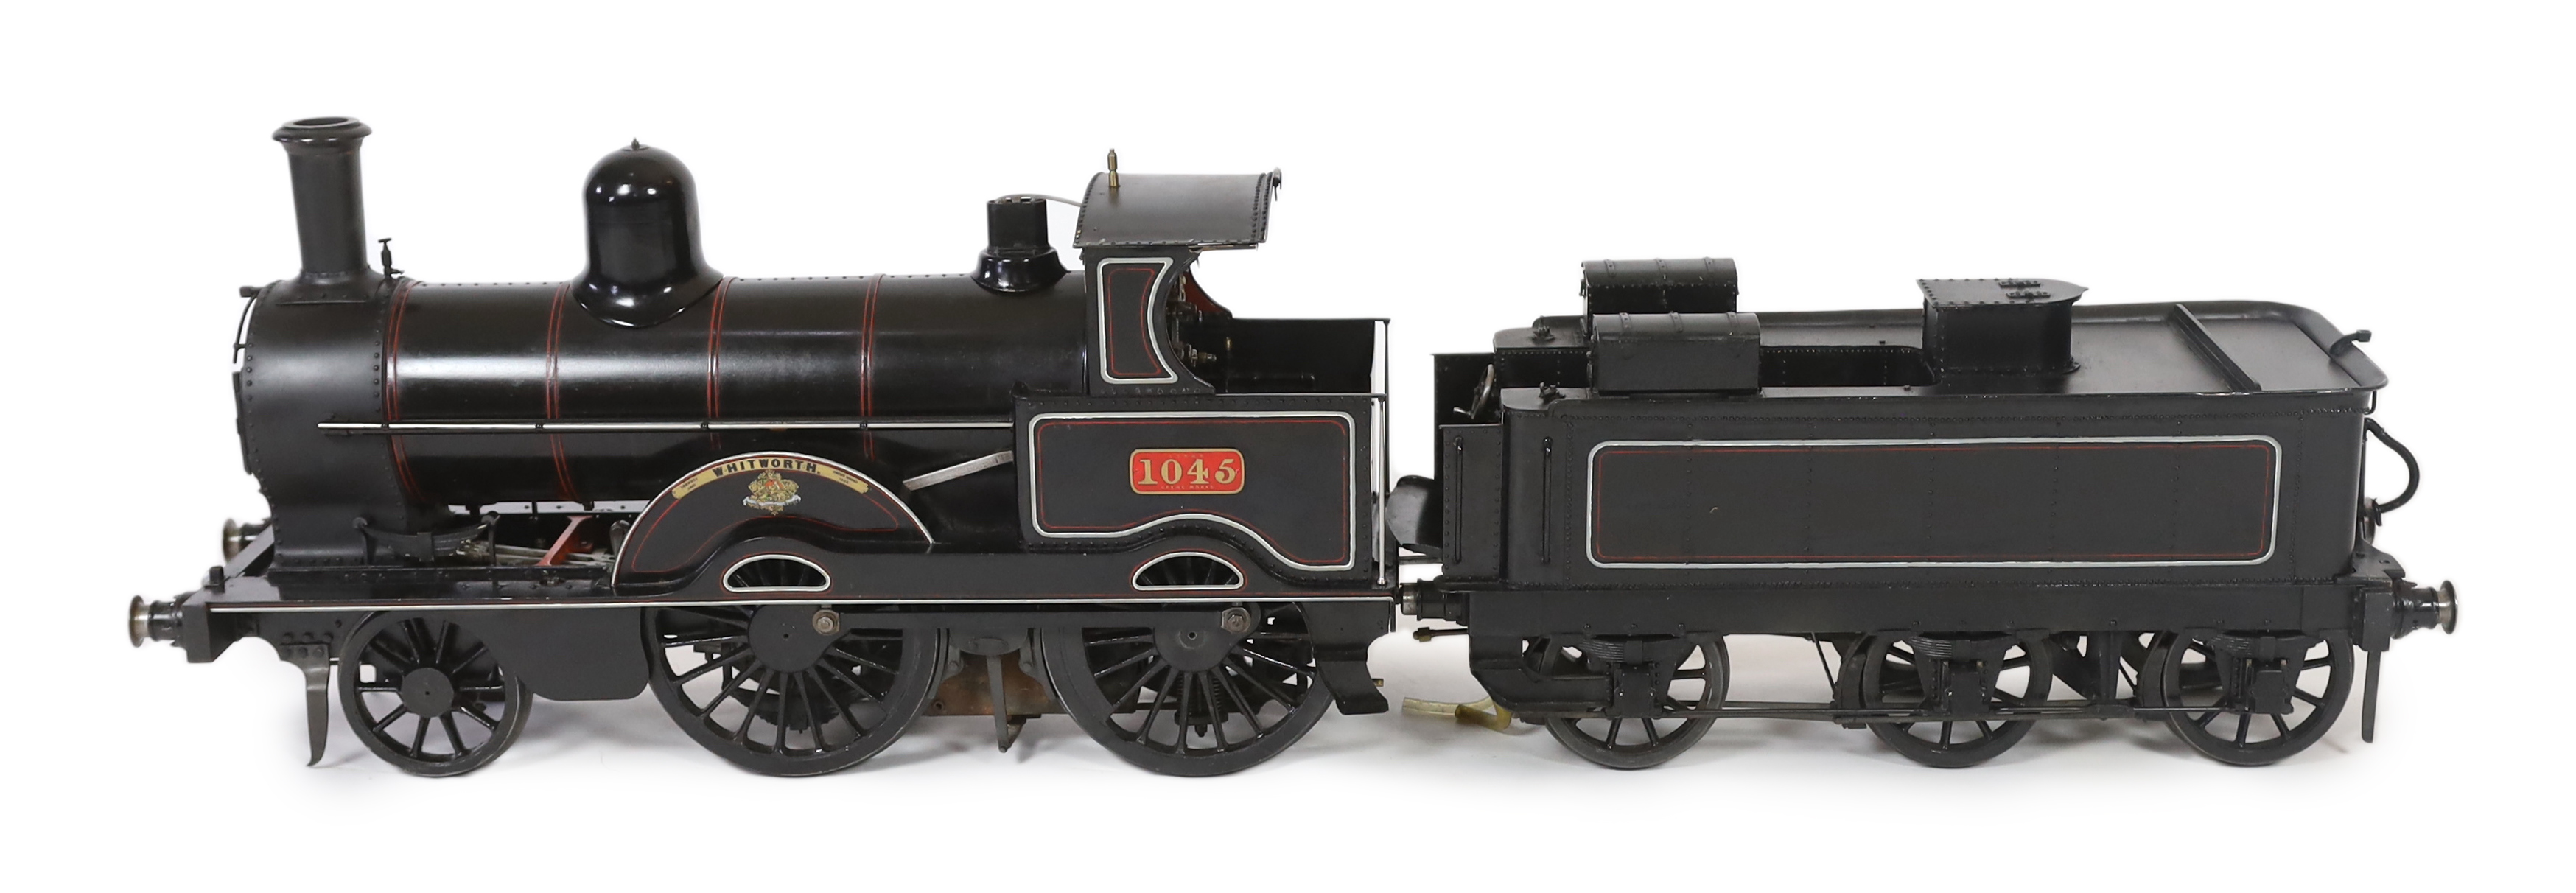 A very finely engineered scratch-built 5” gauge live steam model of a LNWR (London and North Western